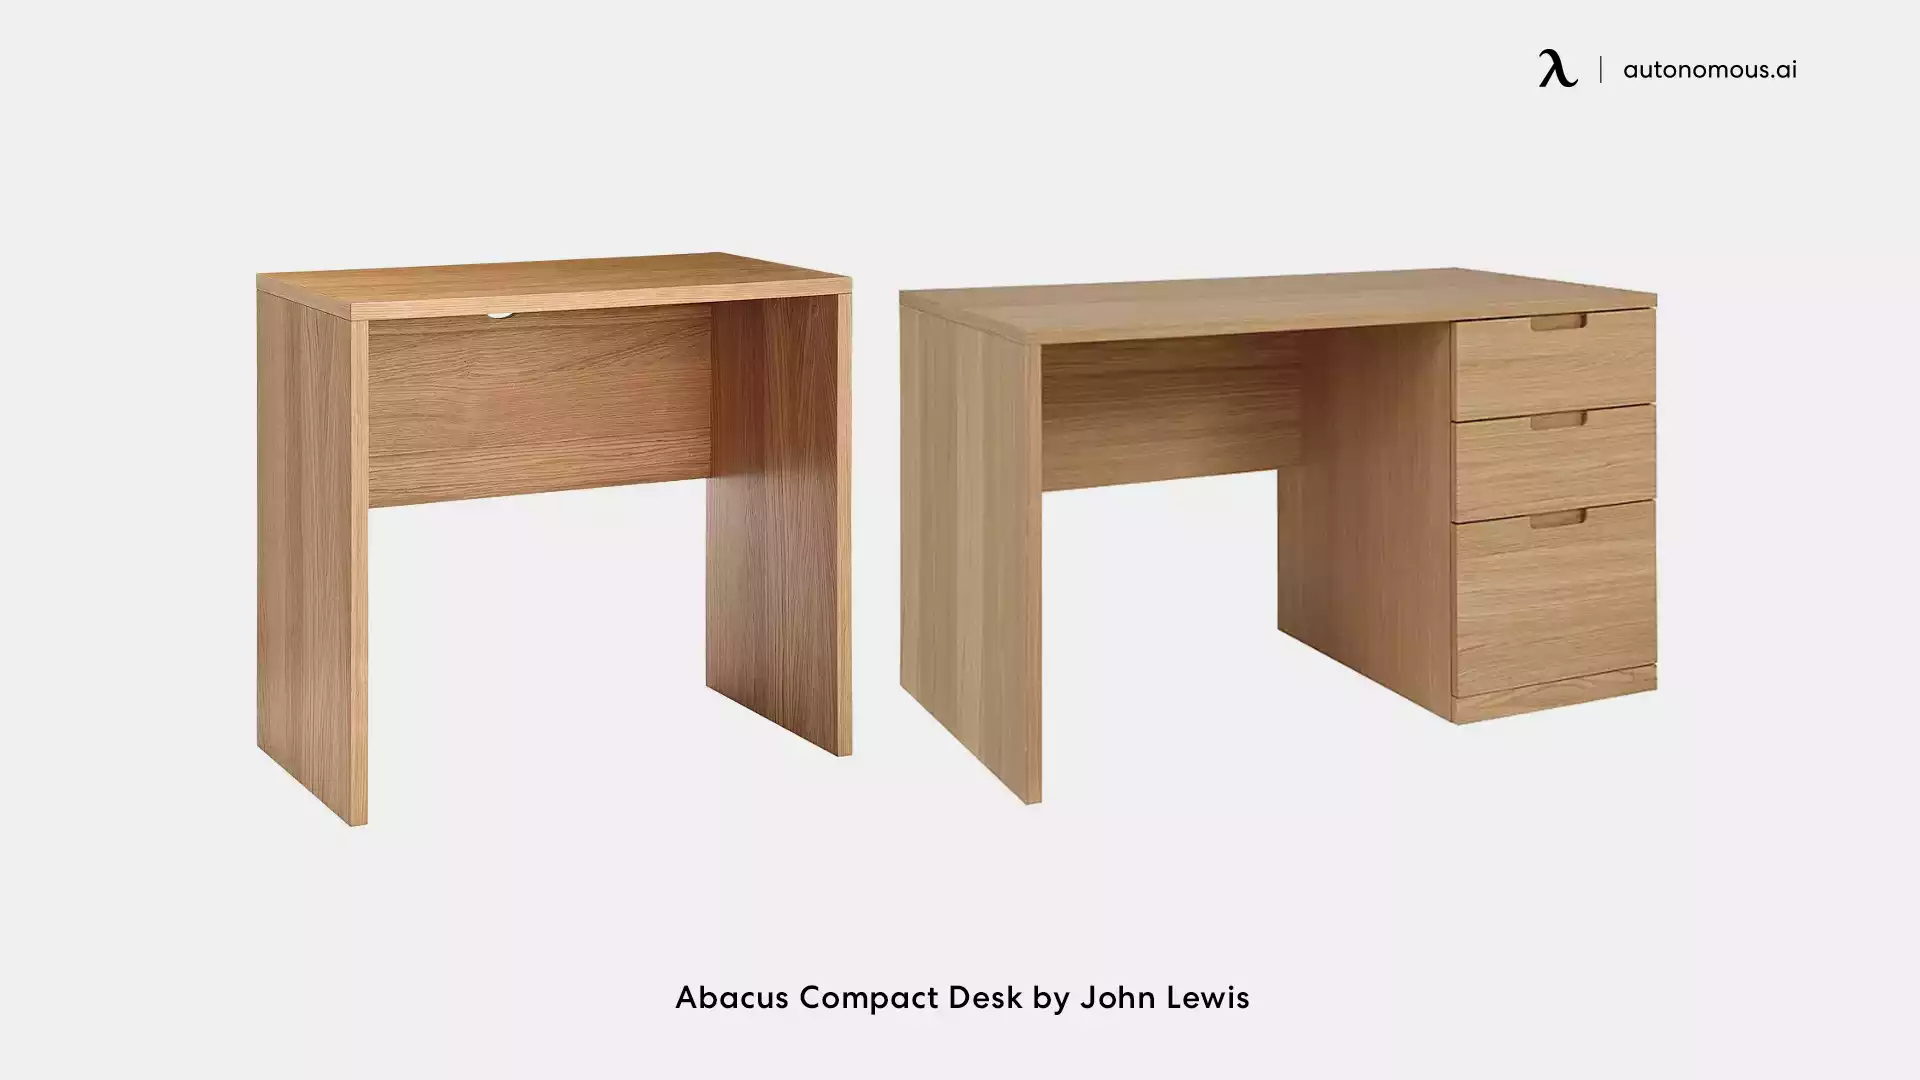 Abacus Compact Desk by John Lewis